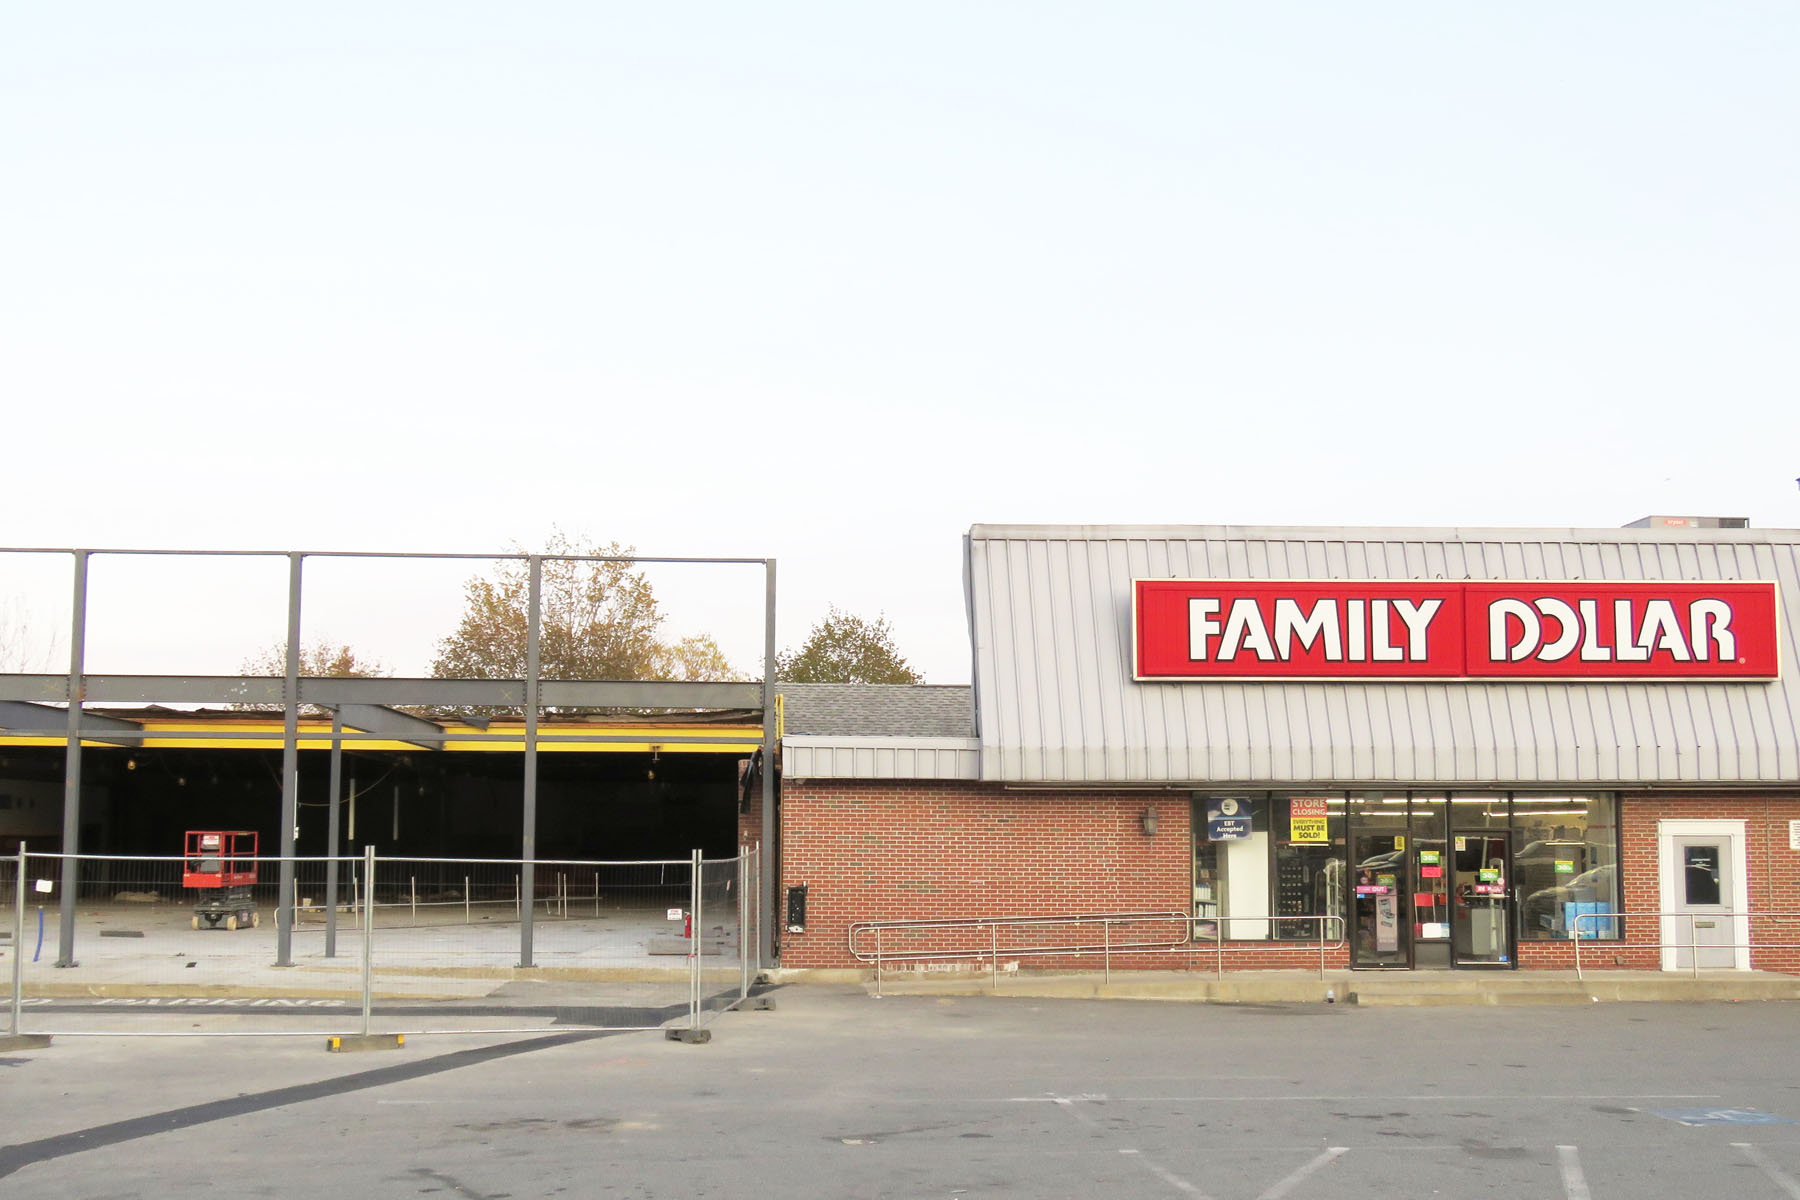 Family Dollar store in transition